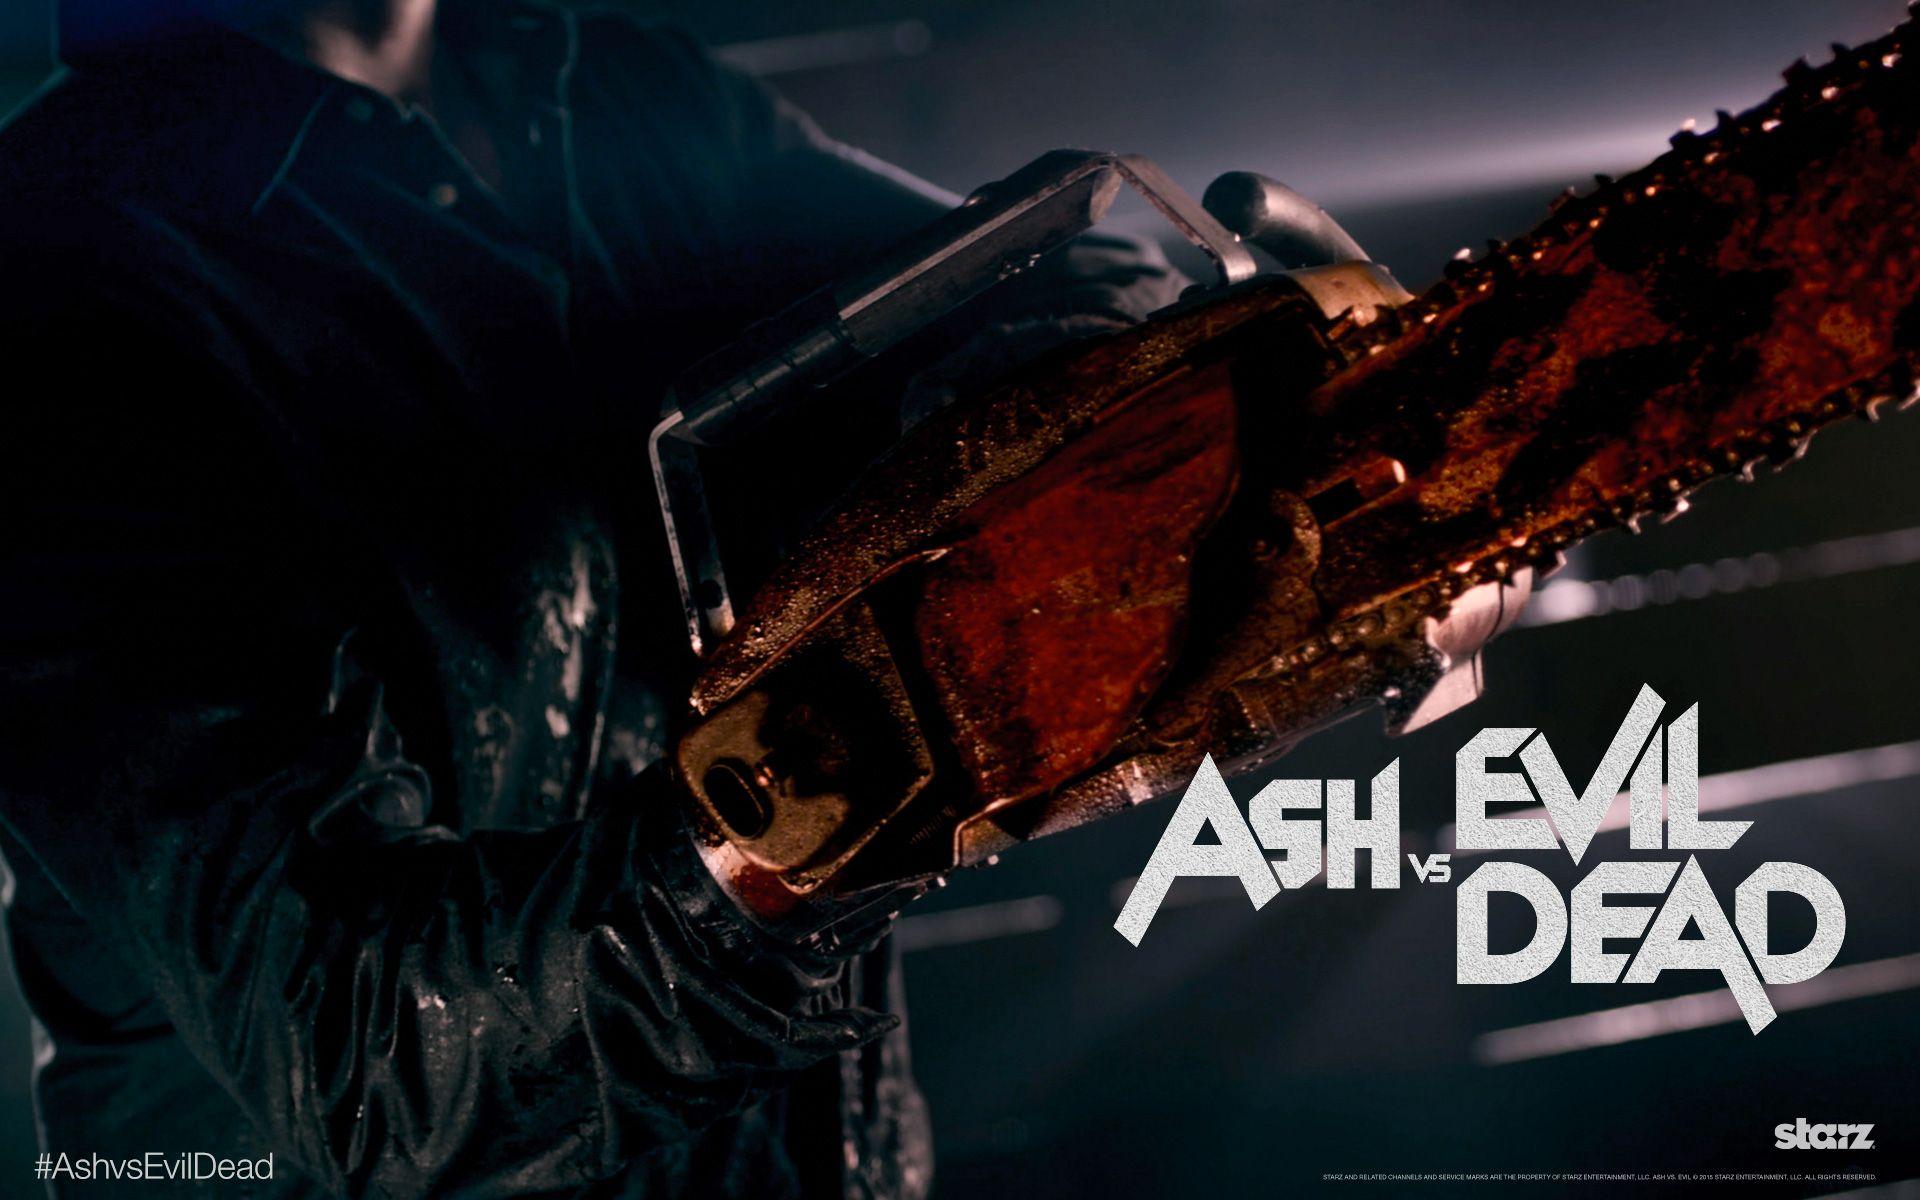 Daily Grindhouse. [IT CAME FROM COMIC CON] ASH VS EVIL DEAD 2015